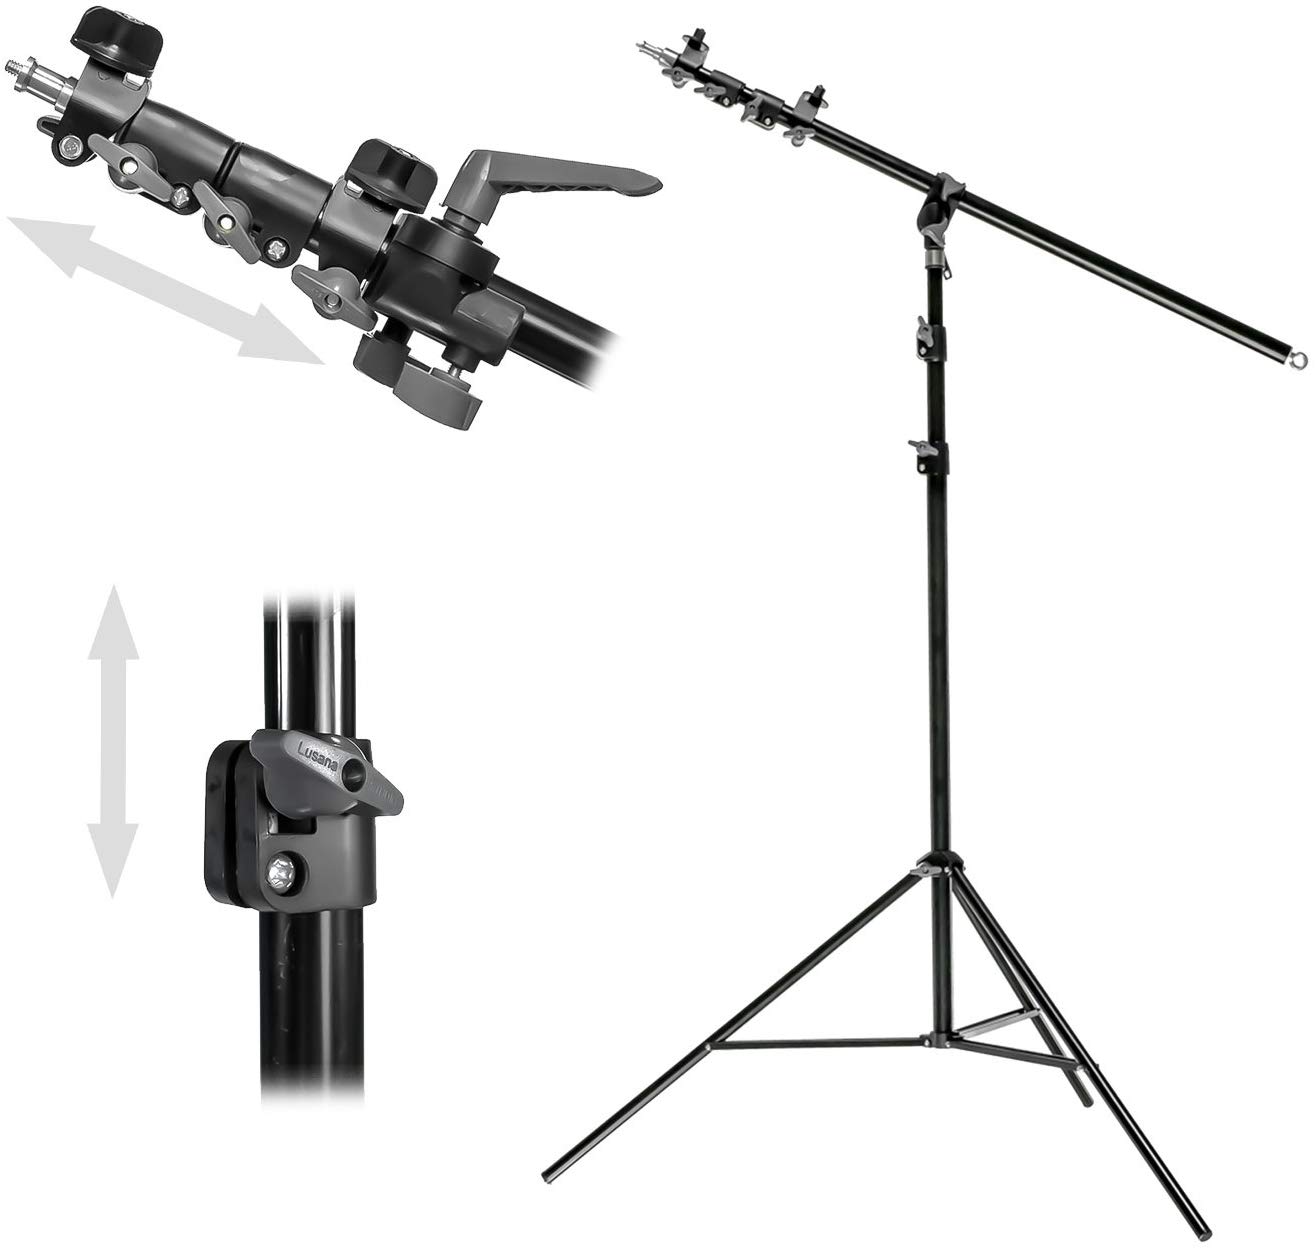 LS Photography 20 x 28 Inch Soft Box Lighting Kit with Bulb Socket, Boom Stand and Slope Arm Bar, 1200W Output Softbox Light for Video Camera Photography, Photo Portrait Studio, WMT1189 - image 4 of 7